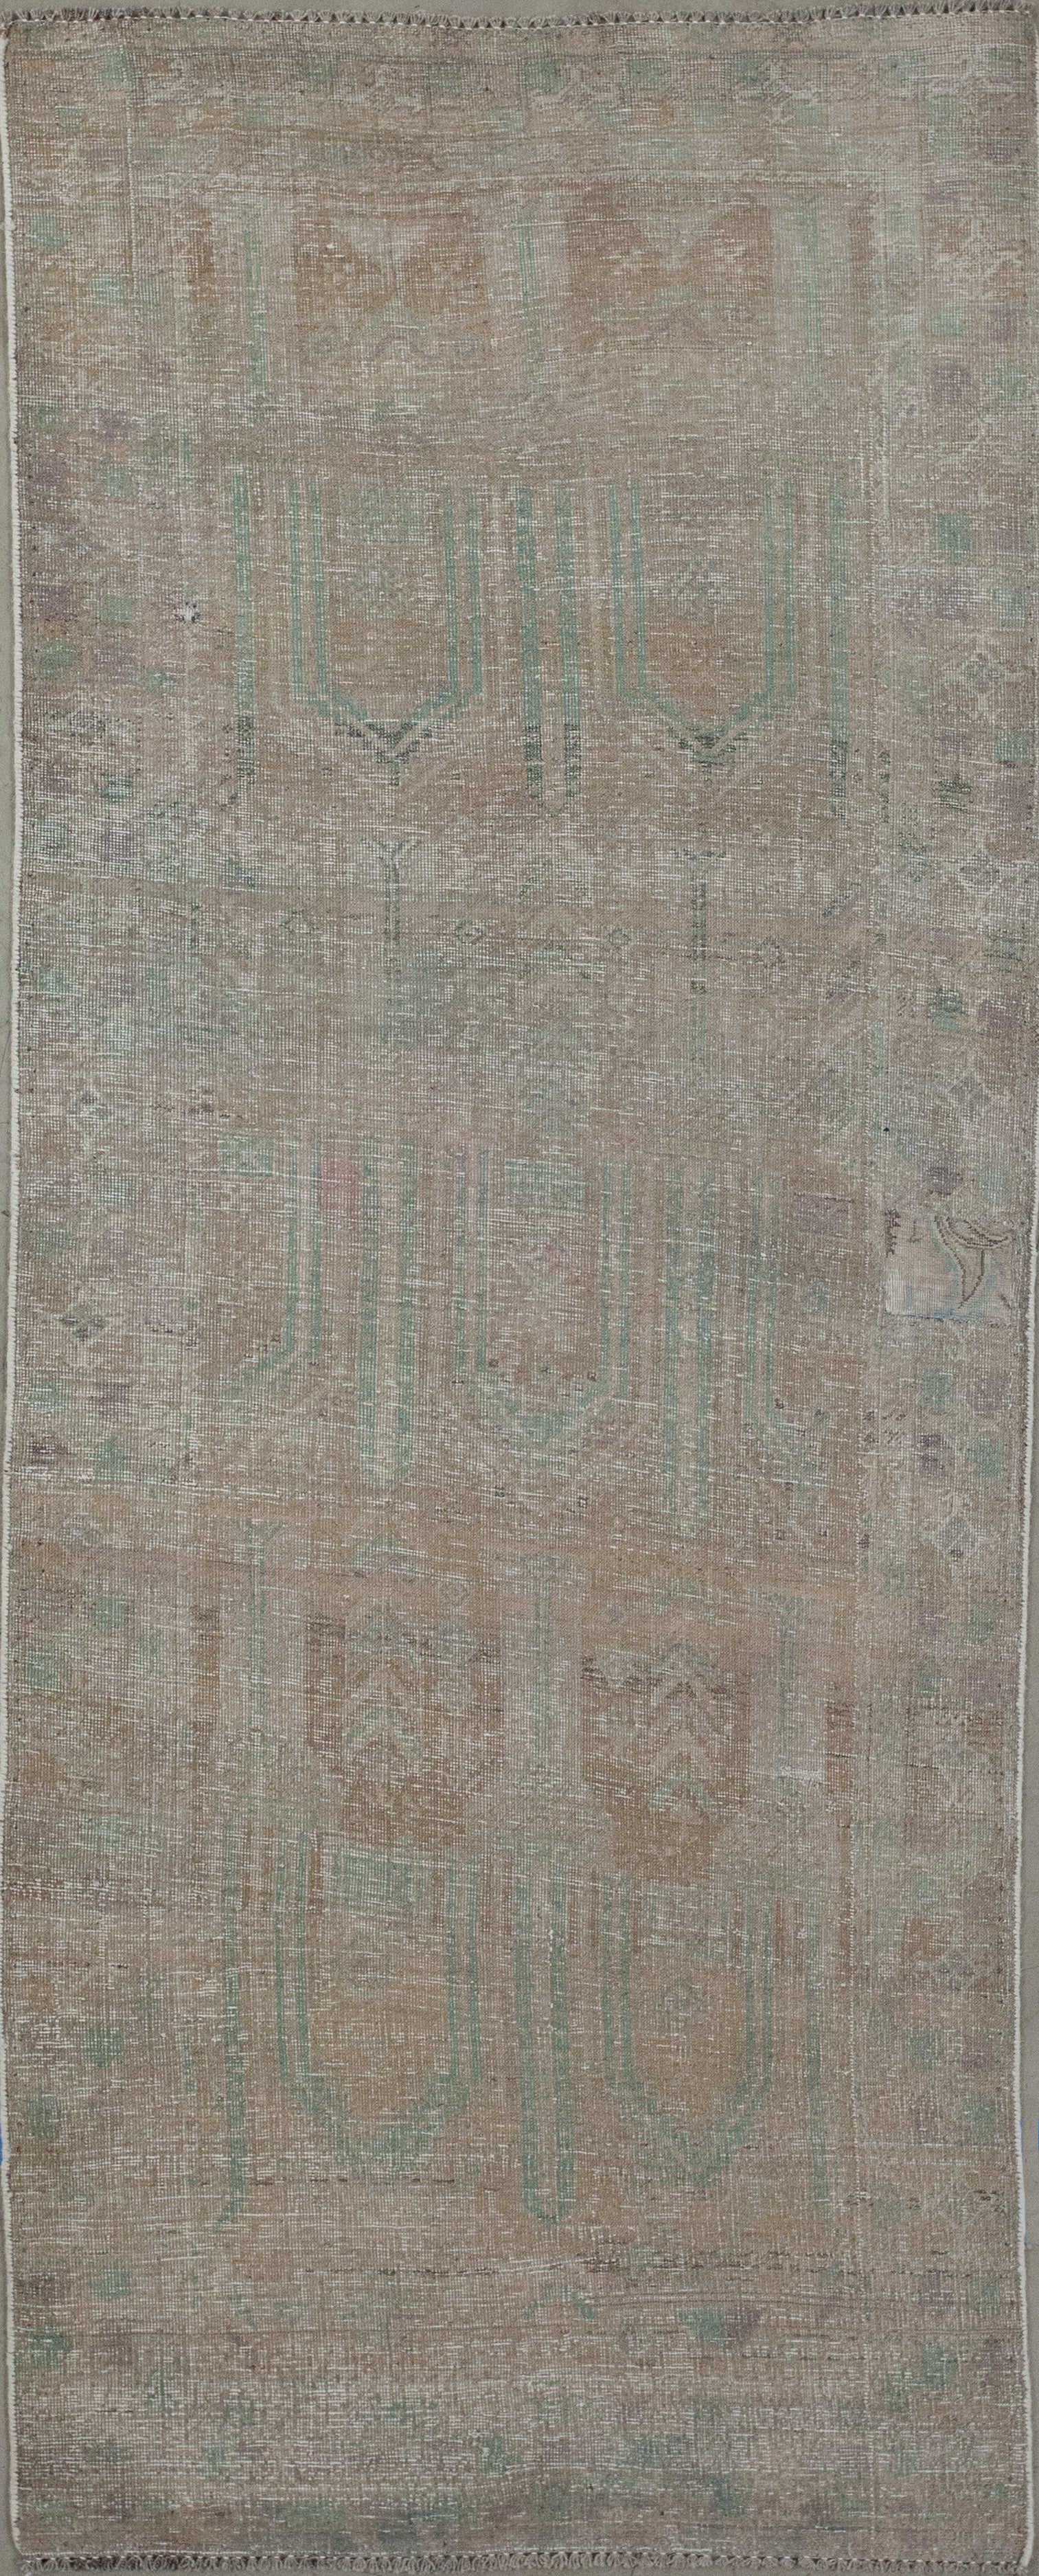 runner rug with a tenuous turquoise pattern.